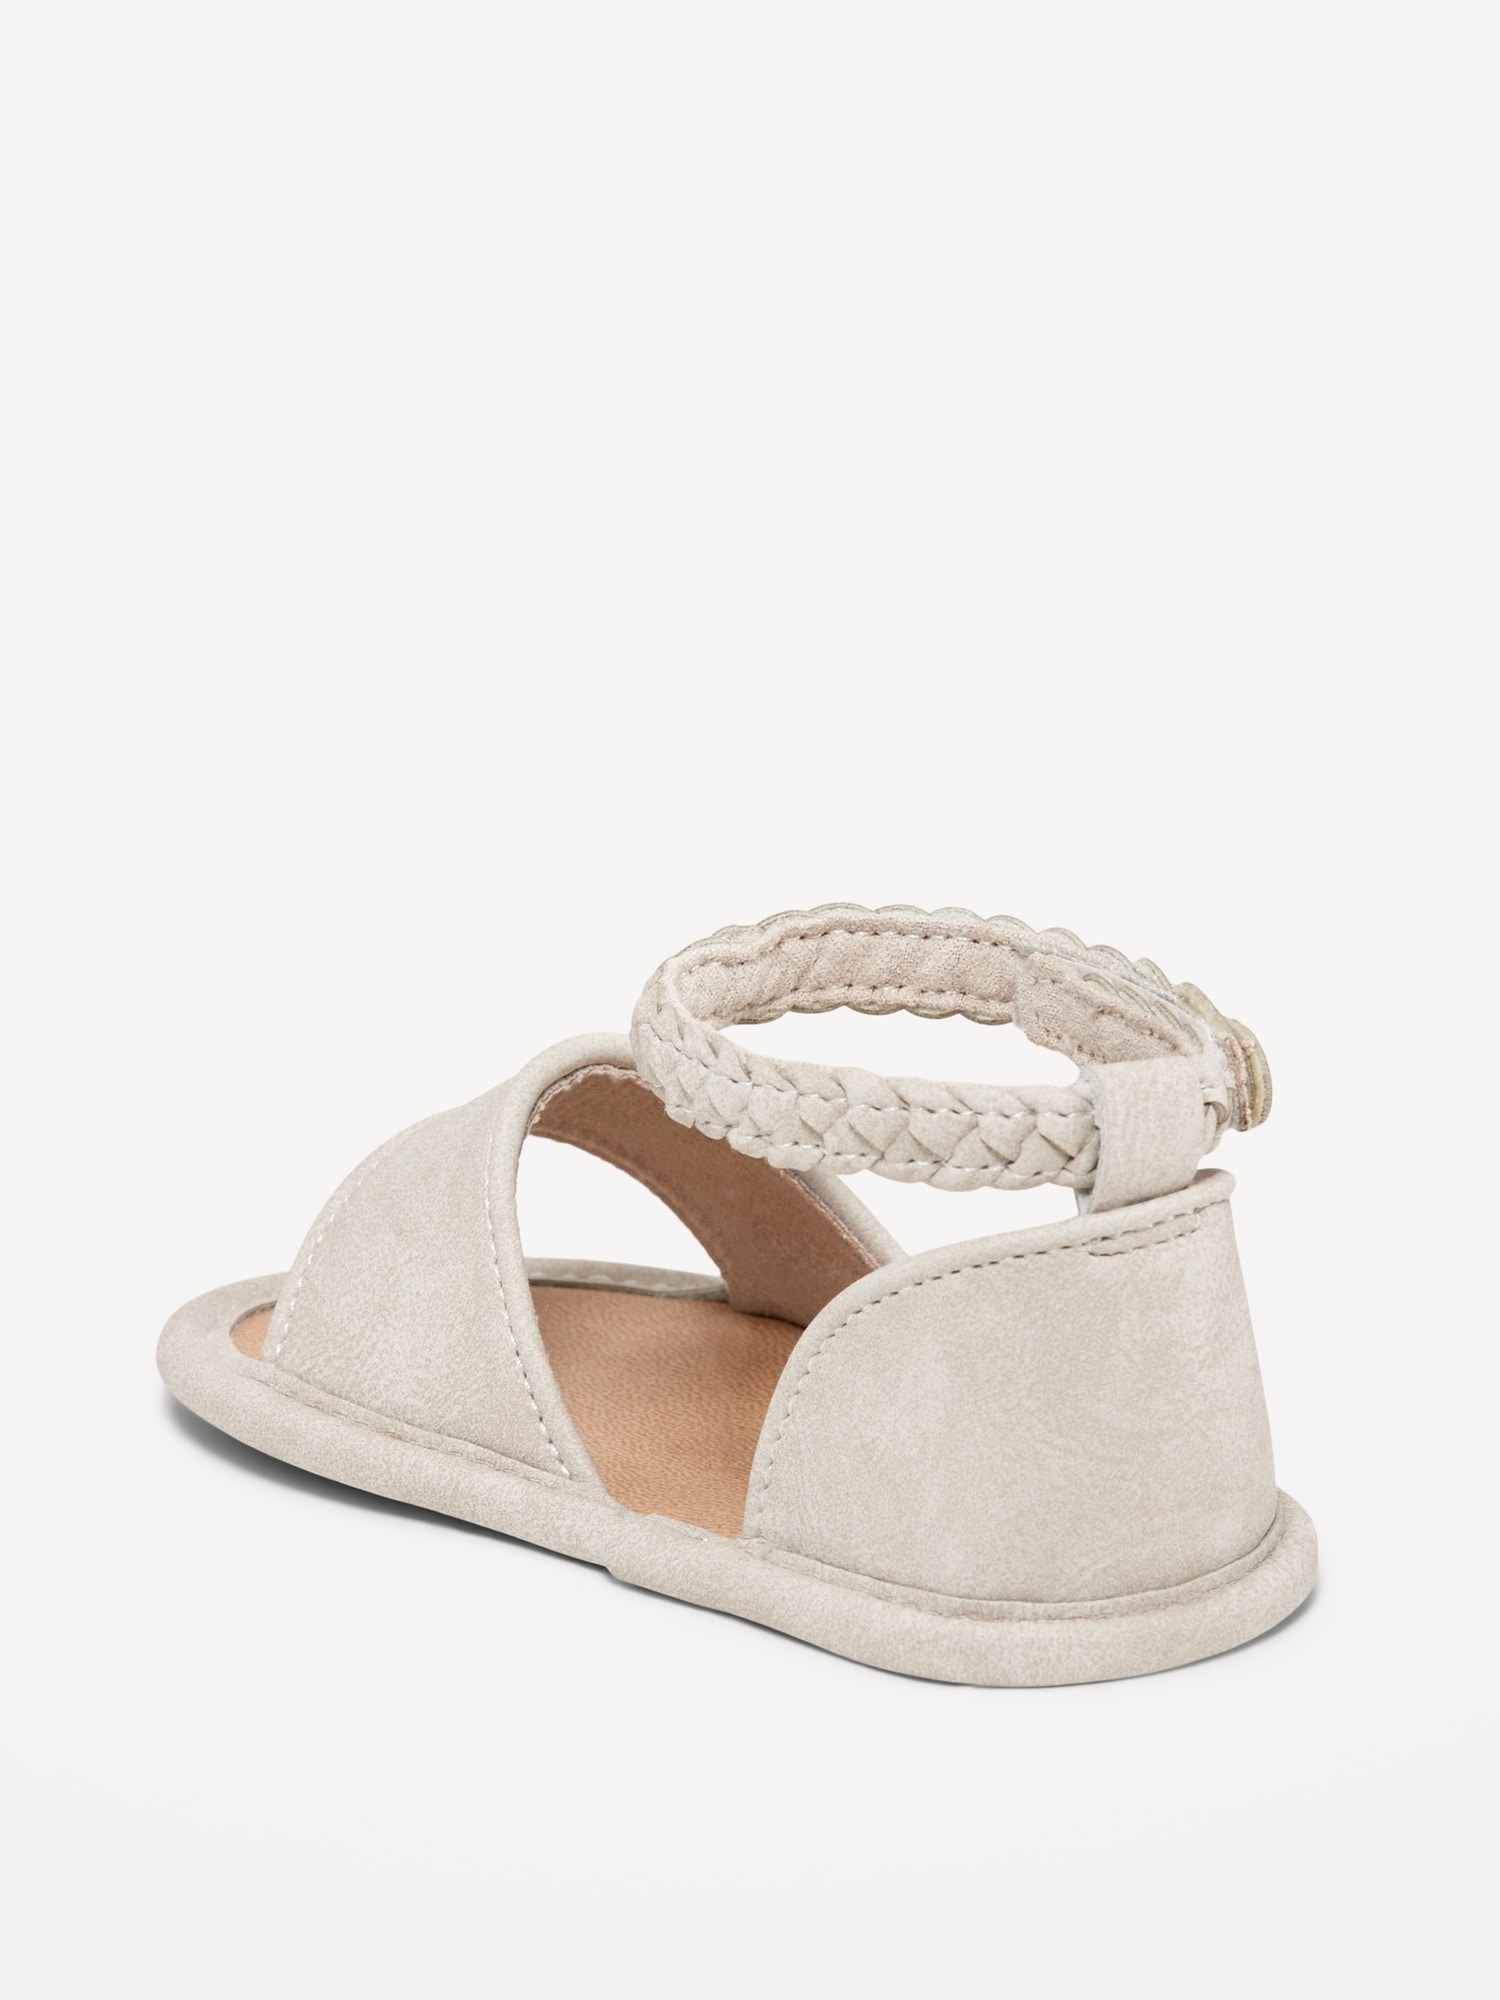 Faux-Suede Braided Sandals for Baby | Old Navy